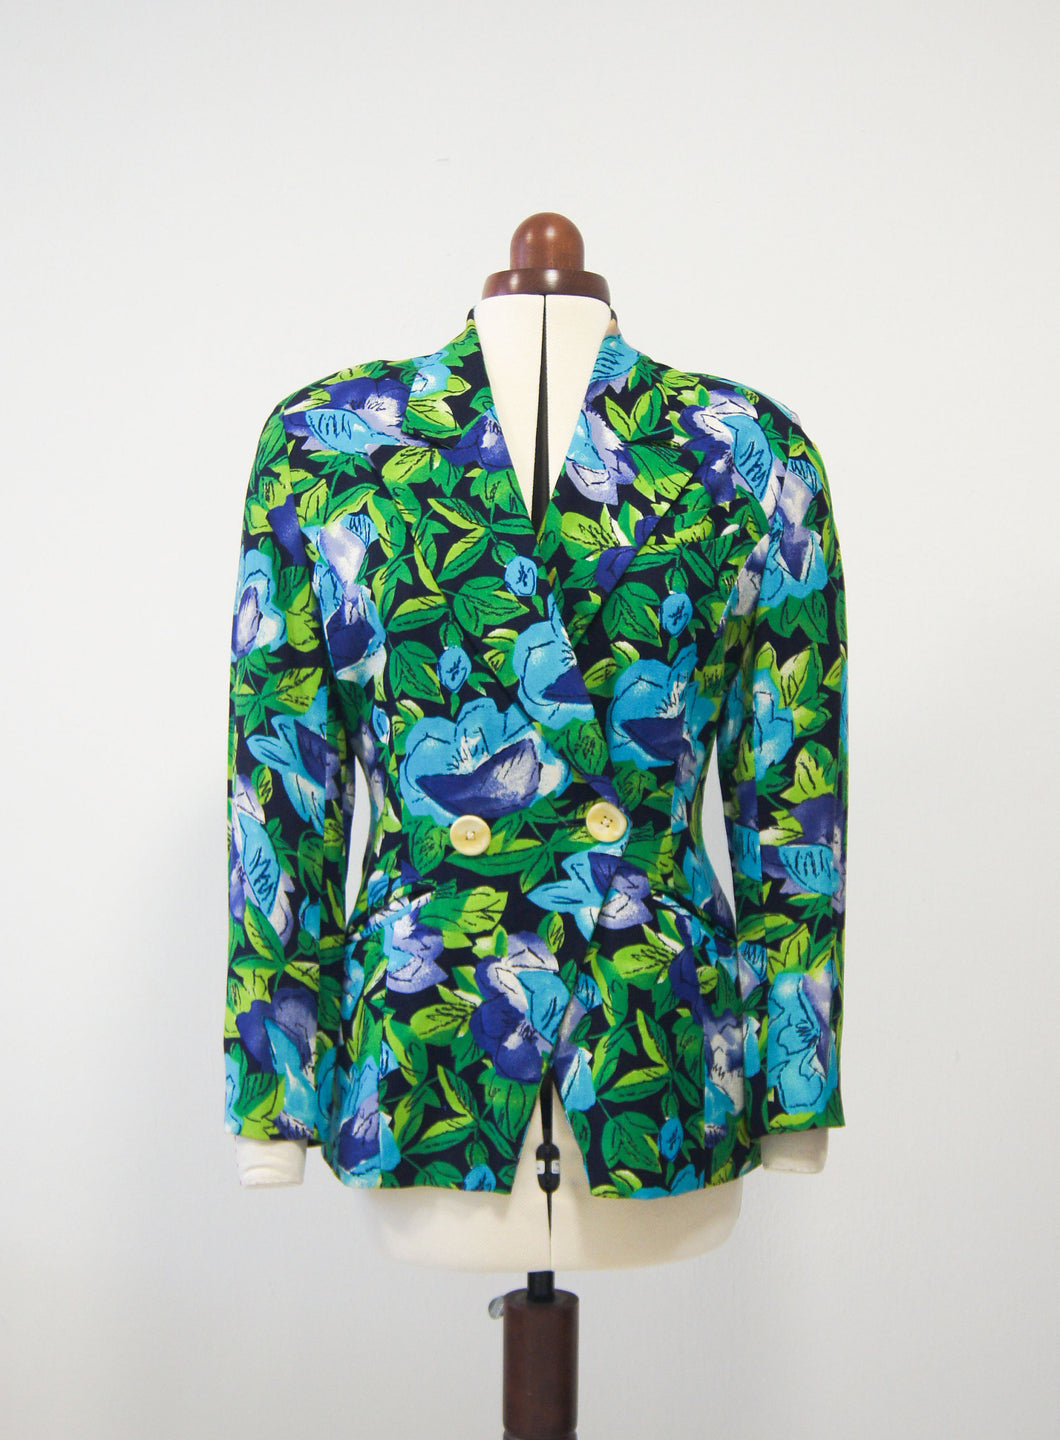 Abstract bloom floral retro vintage linen bold blazer jacket cosplay costume